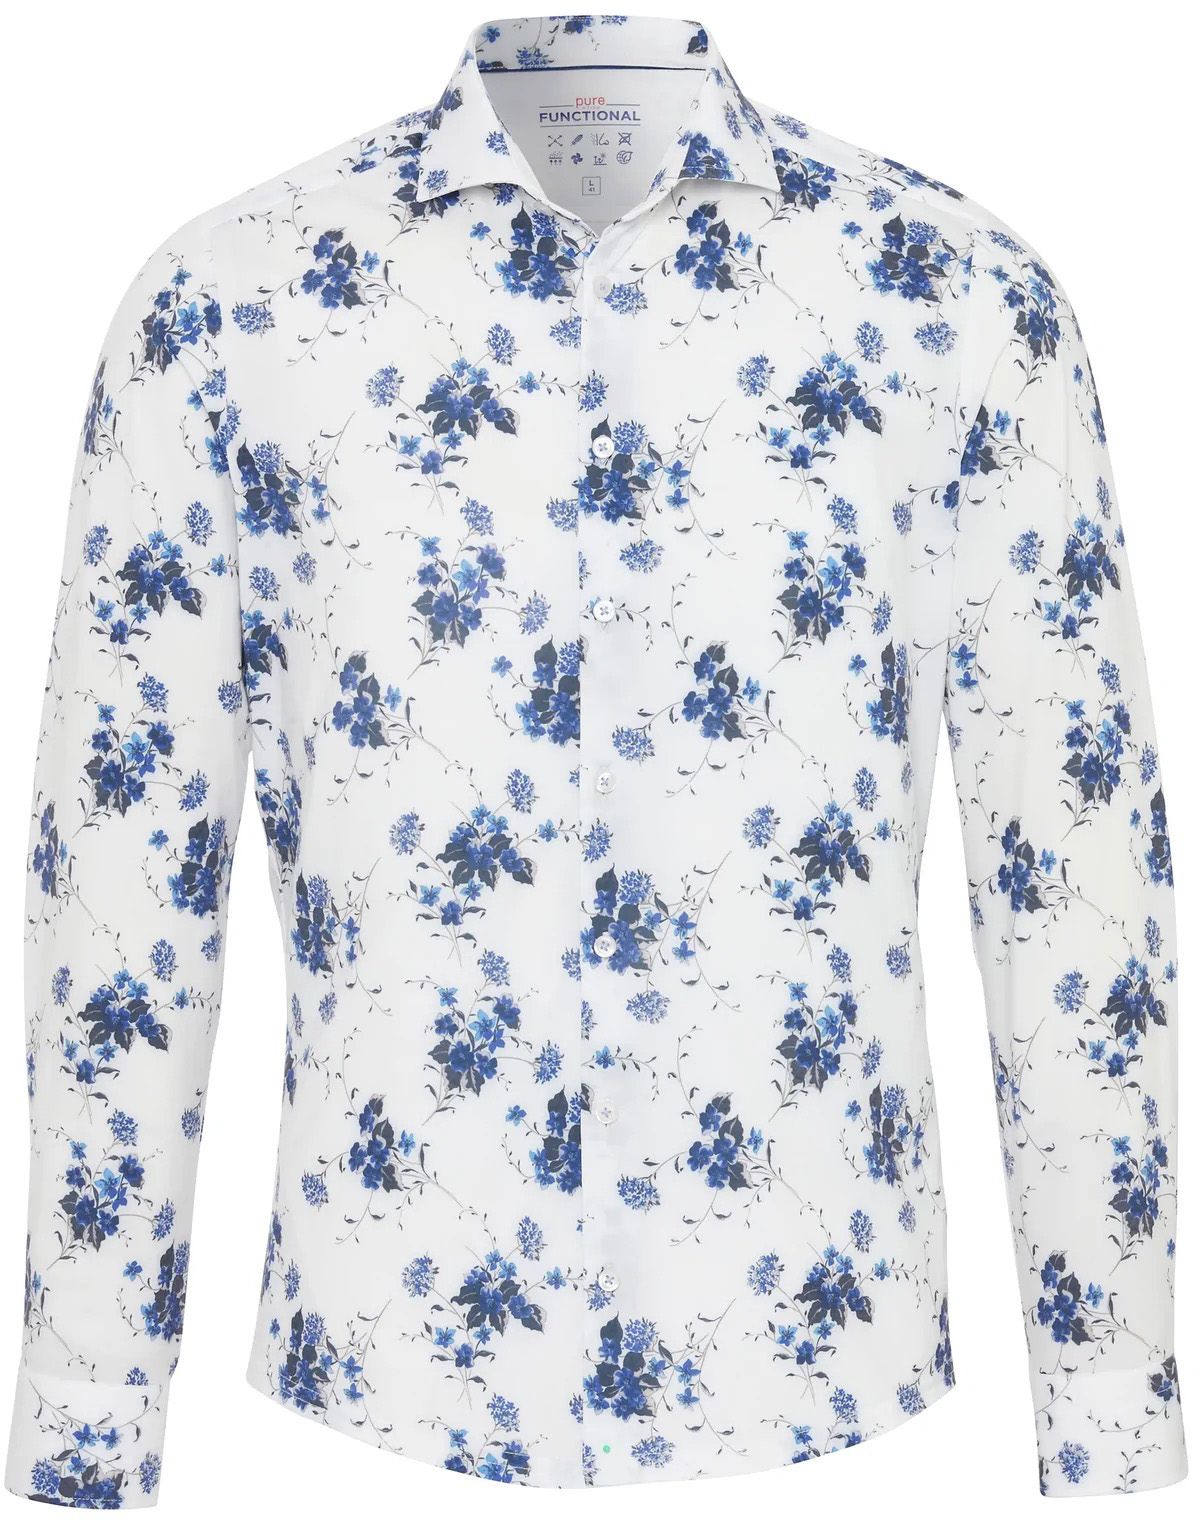 Pure Functional Shirt Floral Print Blue White size 16